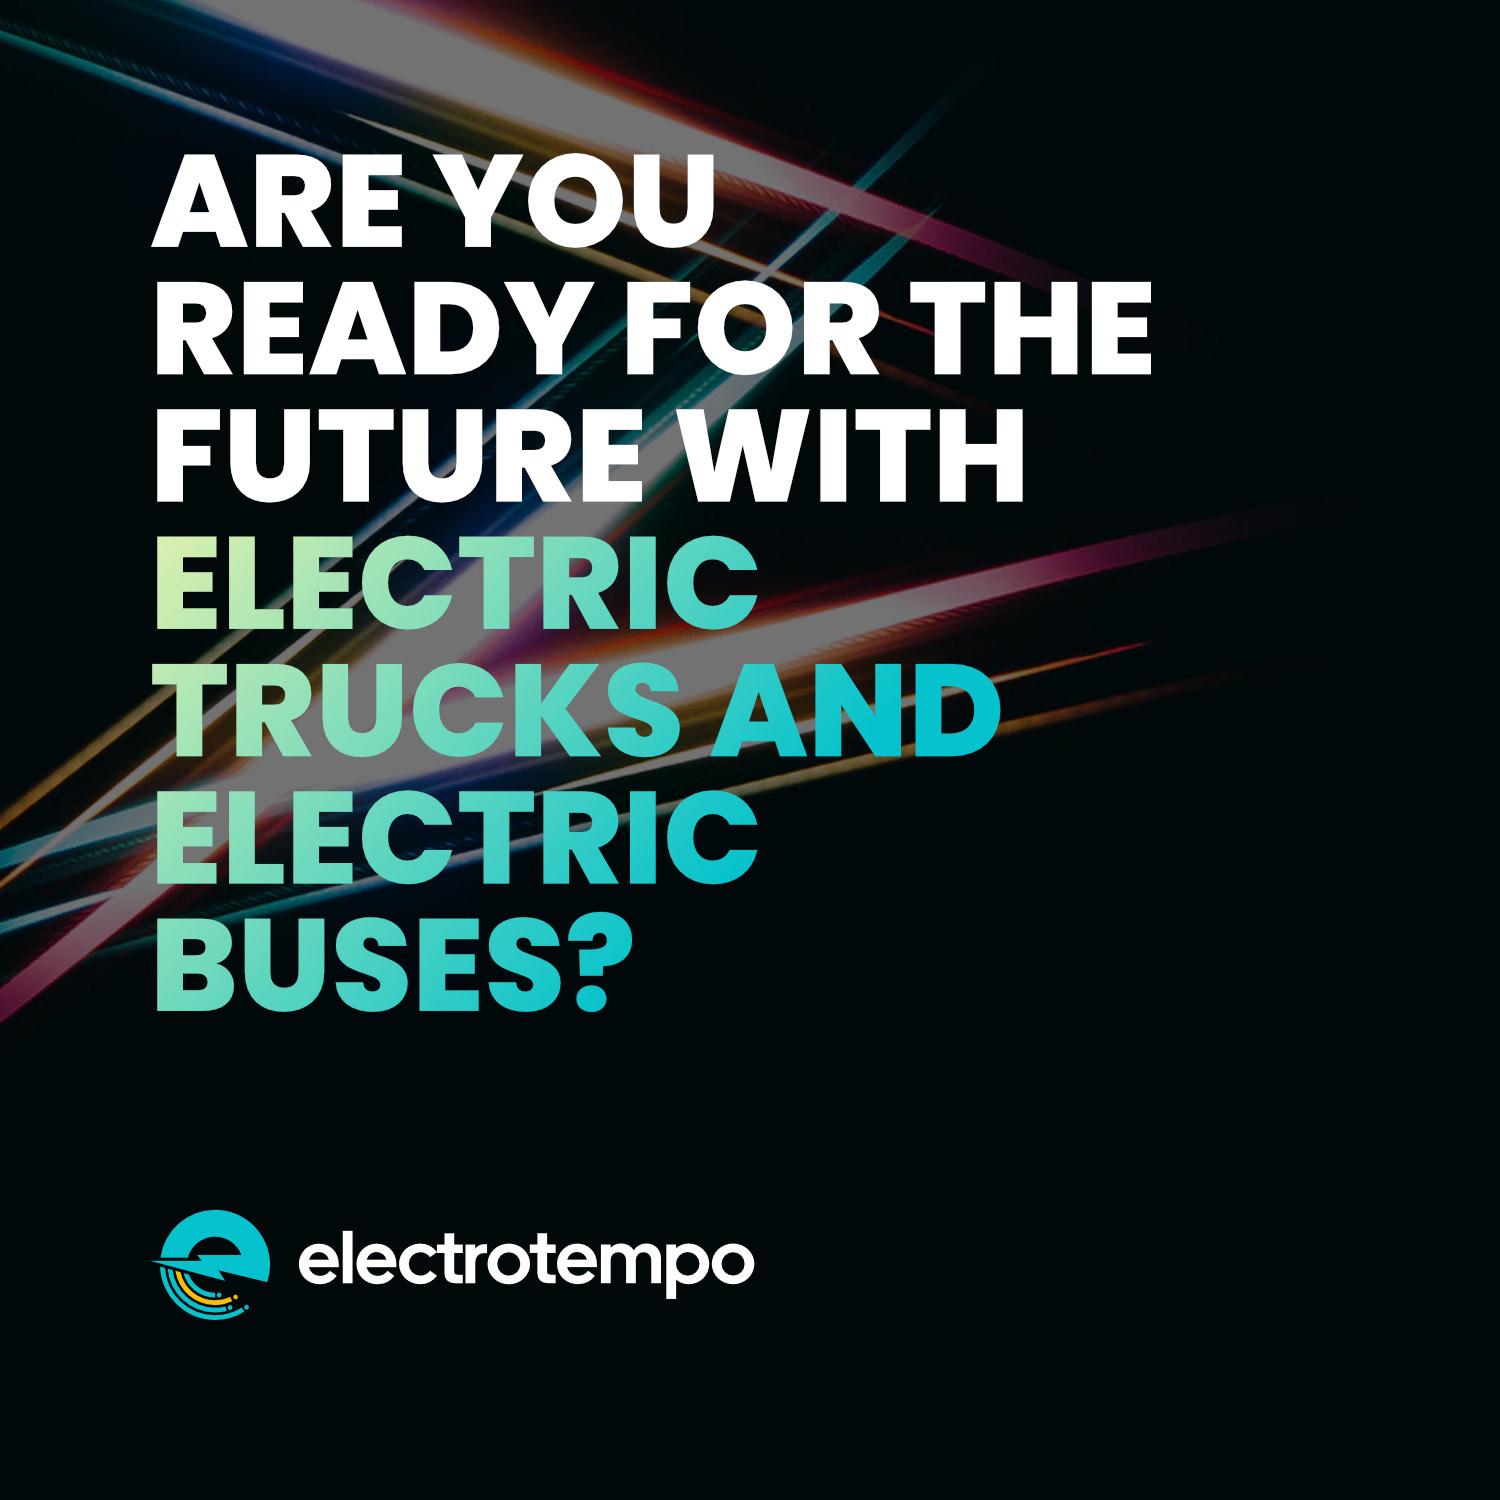 Featured Image for “Are You Ready for the Future with Electric Trucks and Electric Buses?”